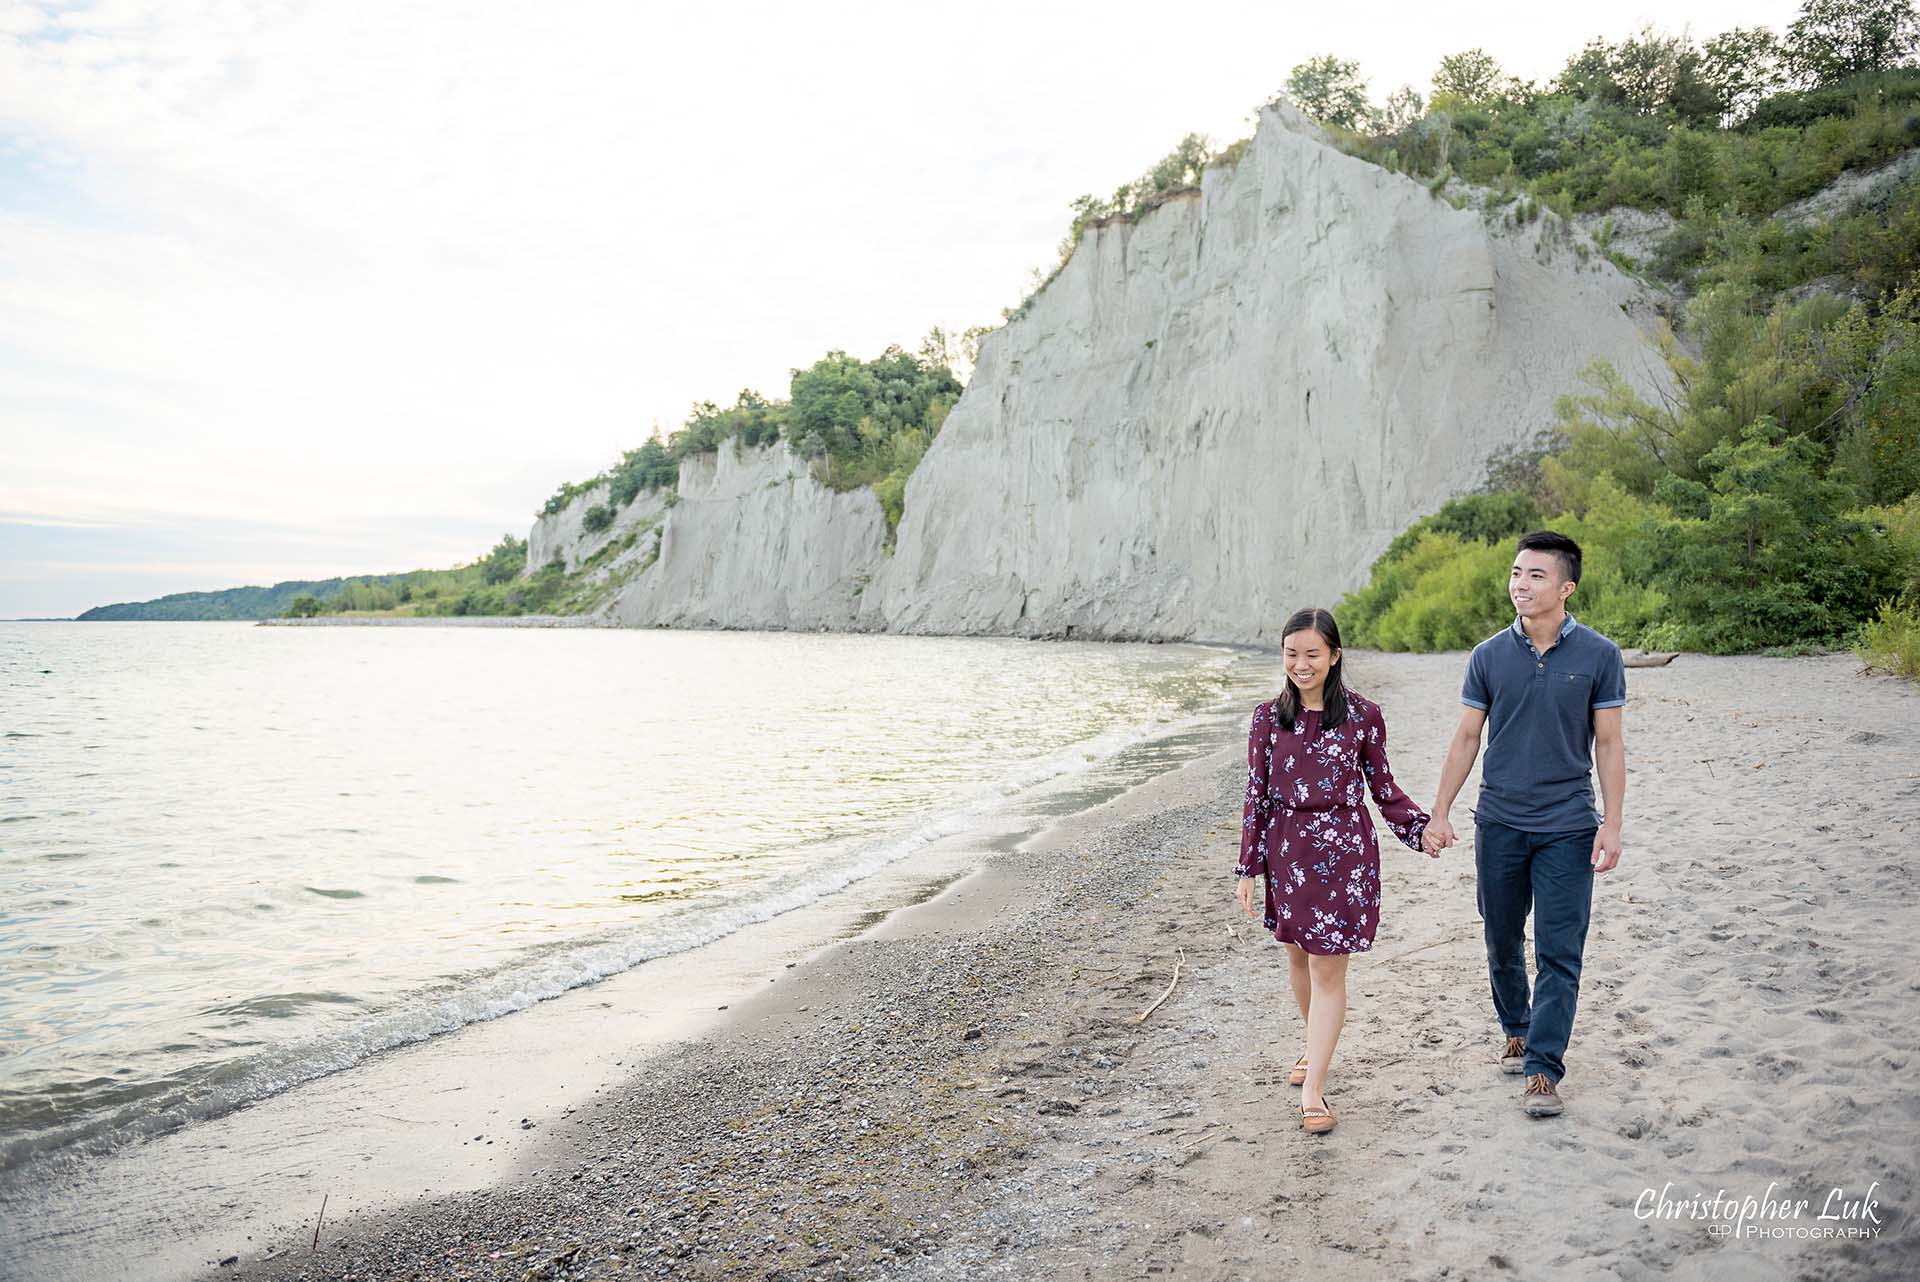 Christopher Luk Toronto Photographer Scarborough Bluffs Beach Park Sunset Surprise Wedding Marriage Engagement Proposal Candid Natural Photojournalistic Bride Groom Waterfront Water Lake Ontario Background Beachfront Sand Walking Together Holding Hands Edge of Water Smile Landscape Wide